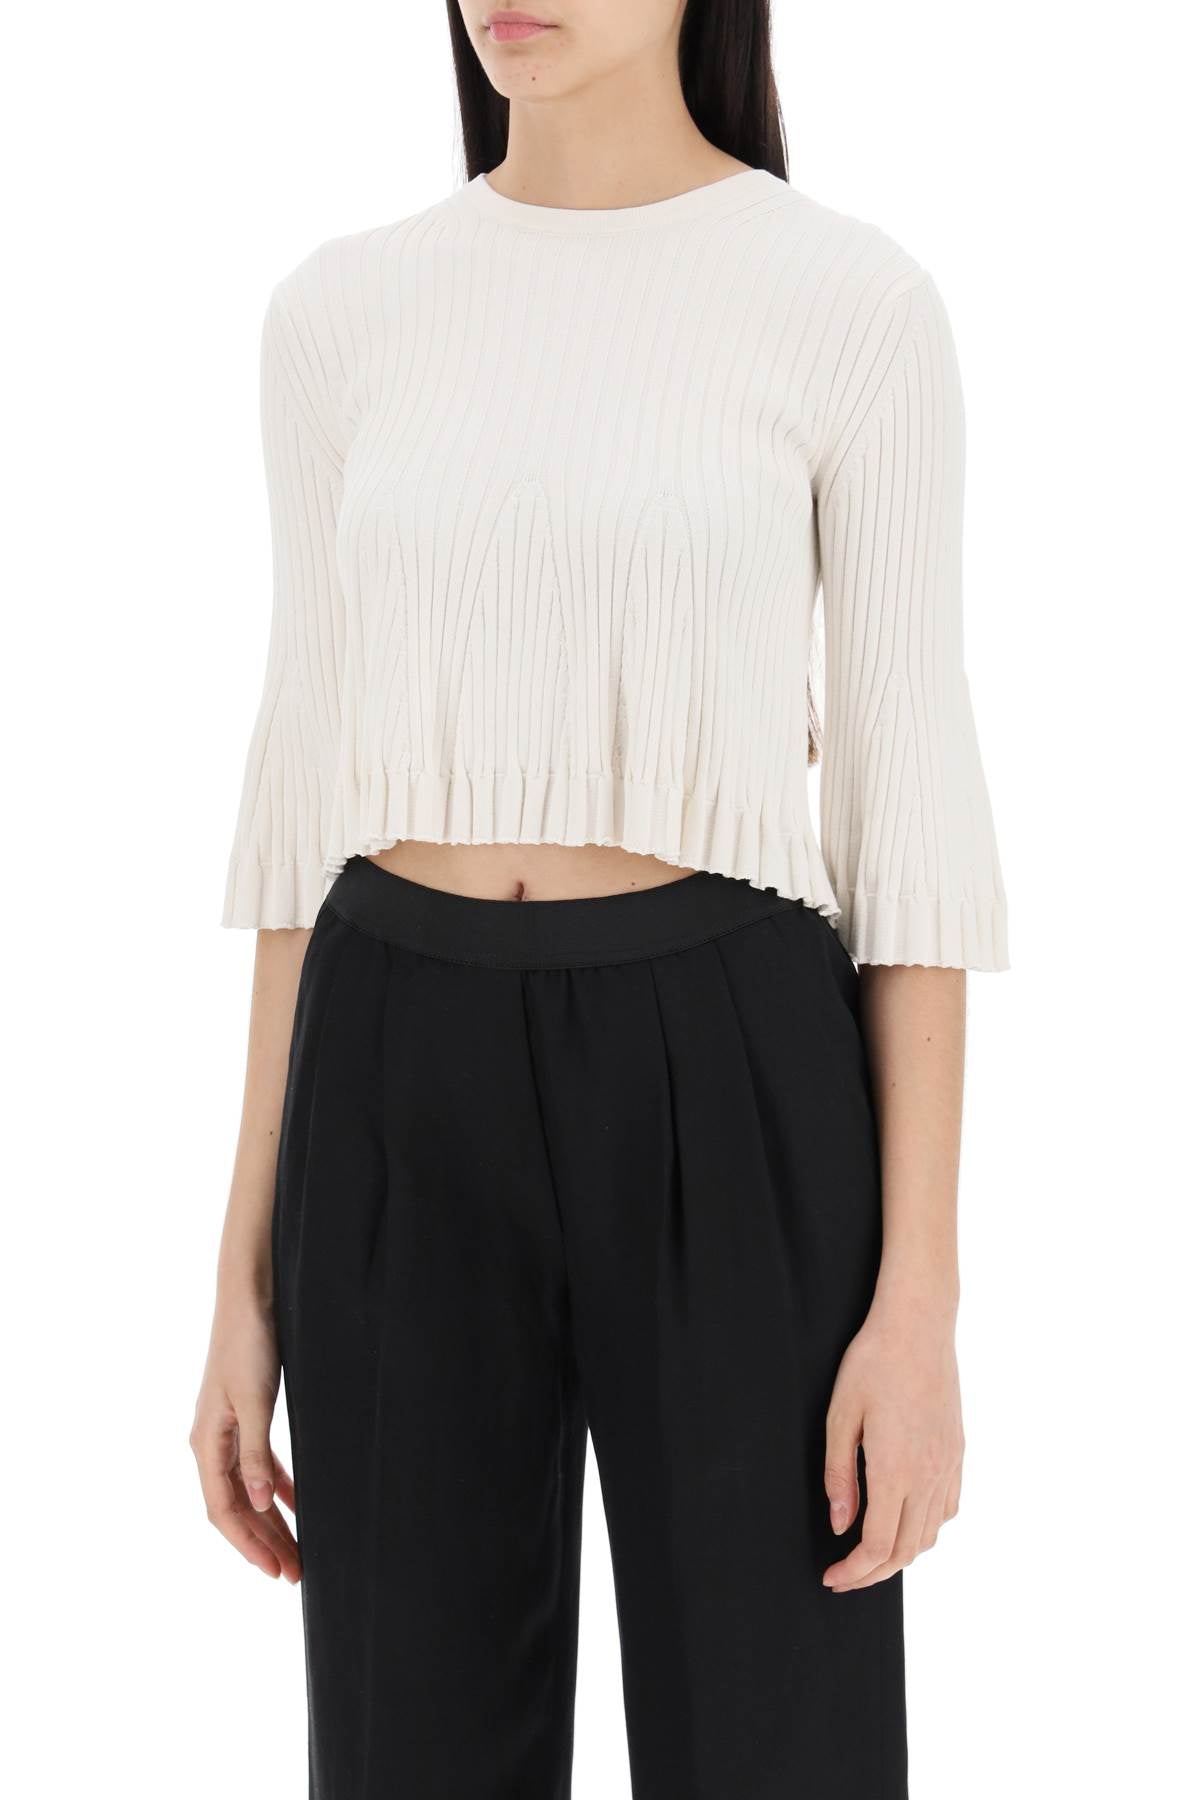 Loulou studio silk and cotton knit ammi crop top in-3